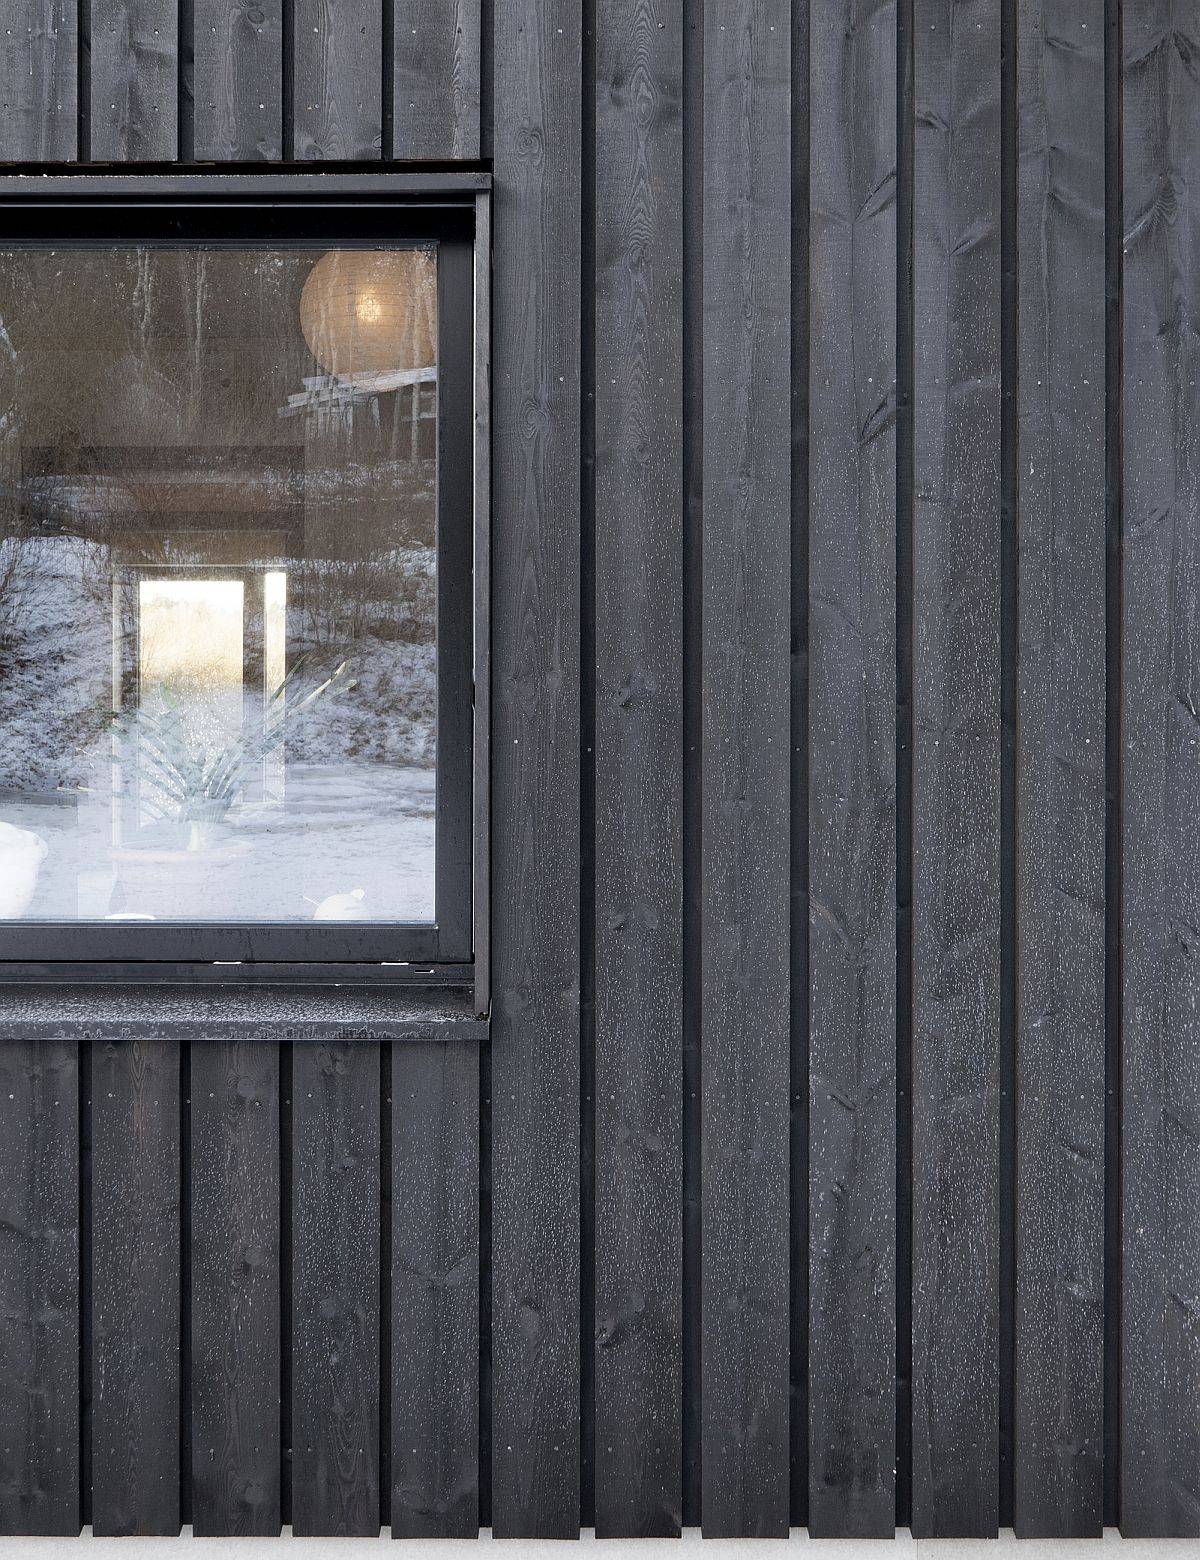 Cross-laminated-wood-treated-with-black-tar-shape-the-exterior-of-this-countryside-Swedish-home-44806